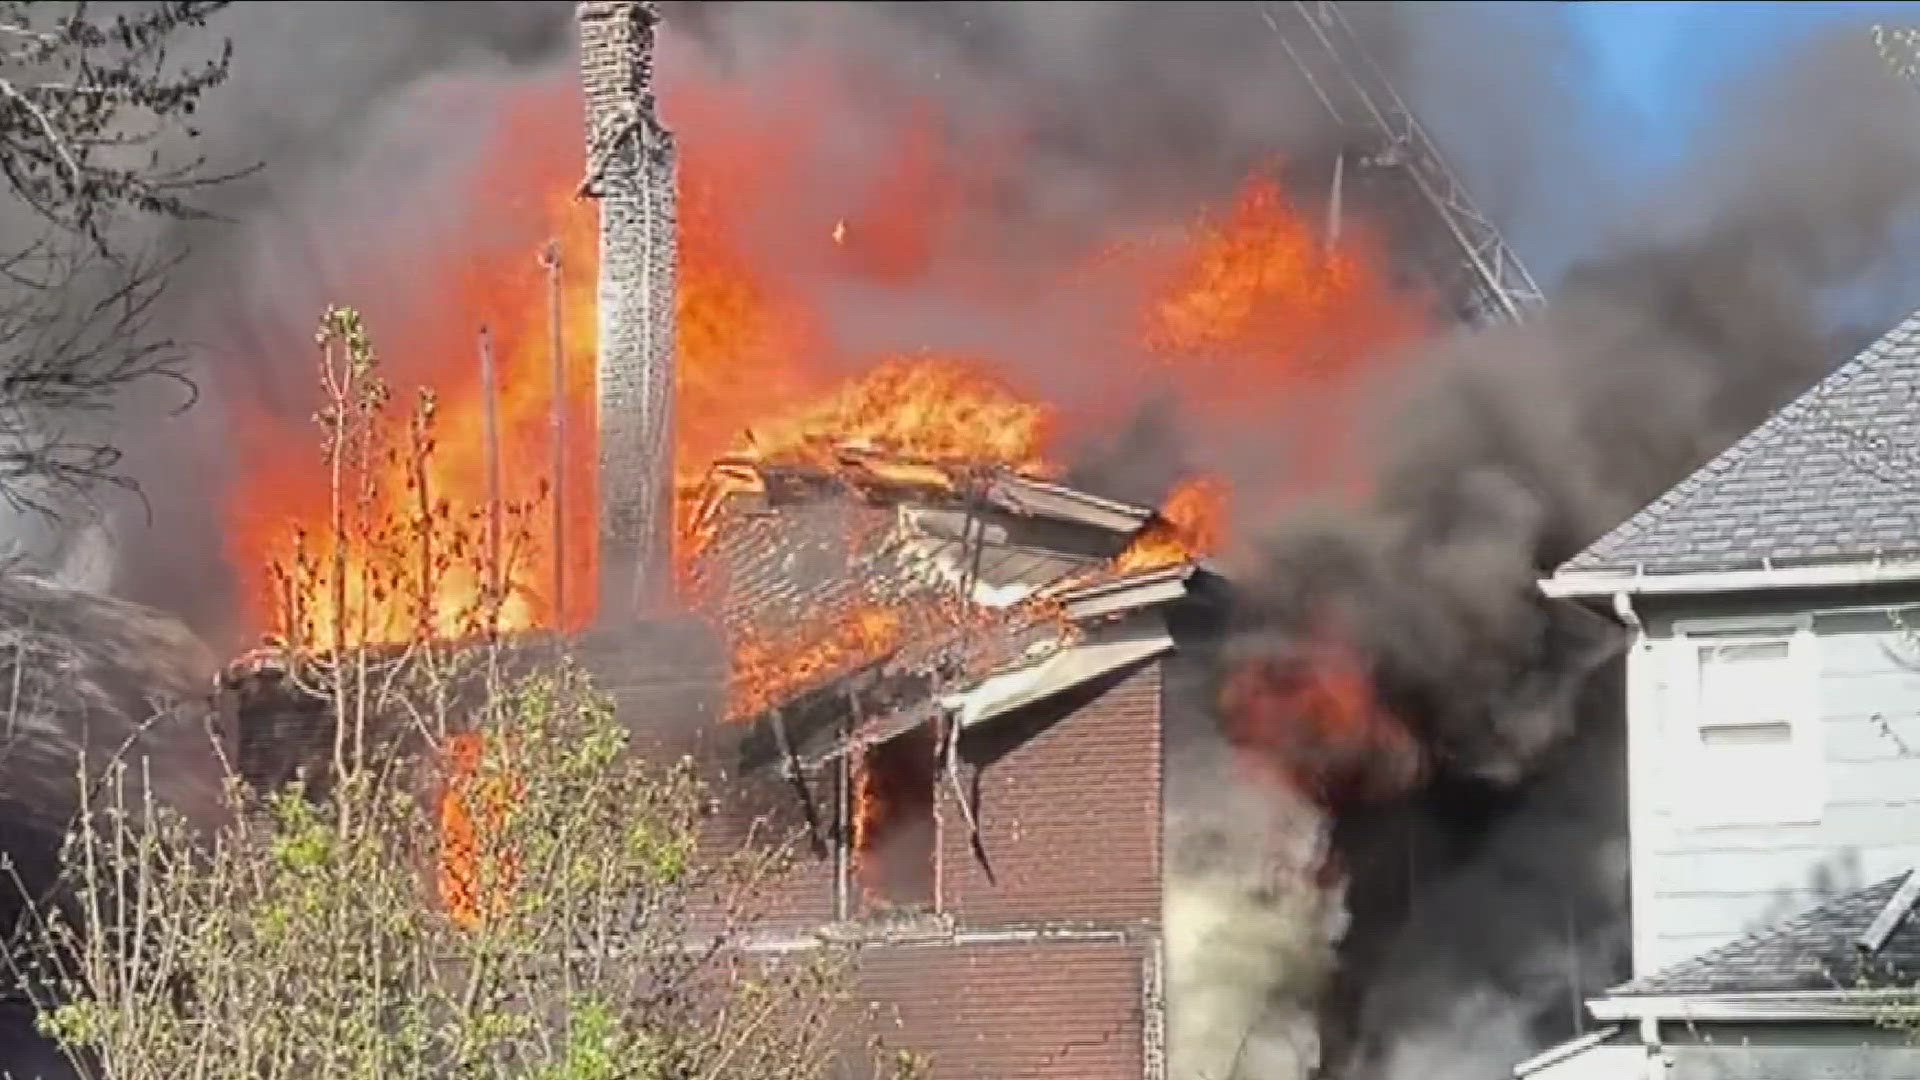 Firefighters battled intense flames and neighboring houses were damaged.